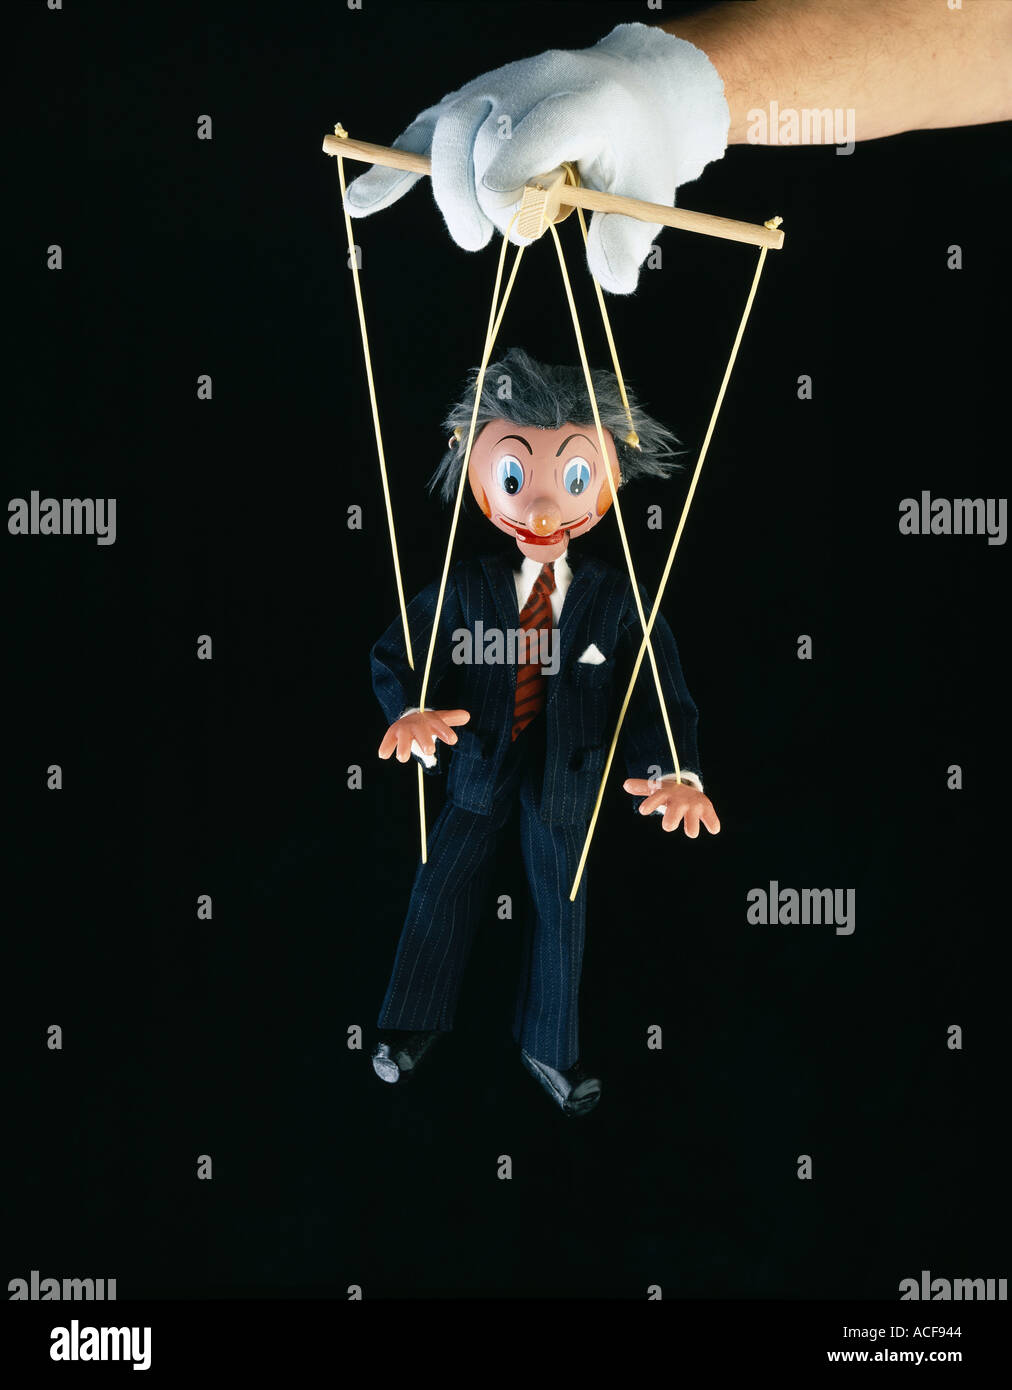 Businessman in a suit puppet being operated by a puppeteer Stock Photo -  Alamy